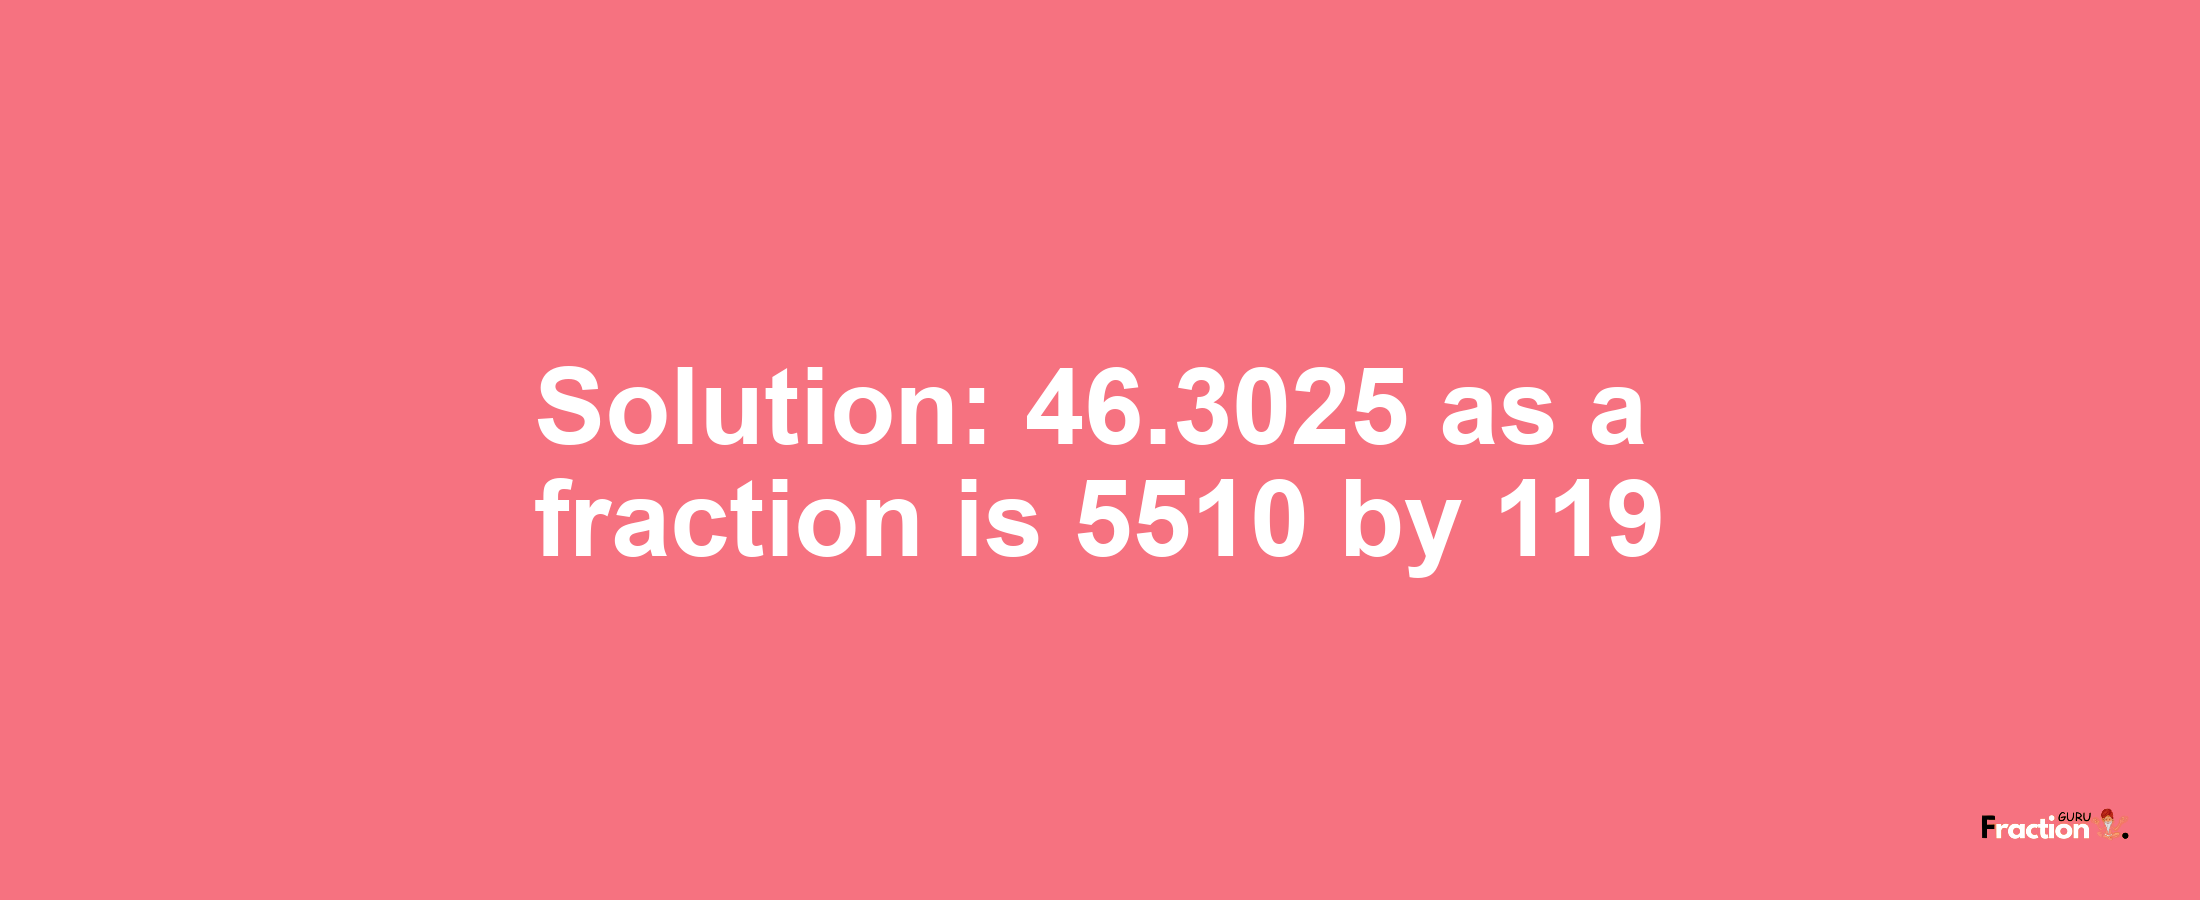 Solution:46.3025 as a fraction is 5510/119